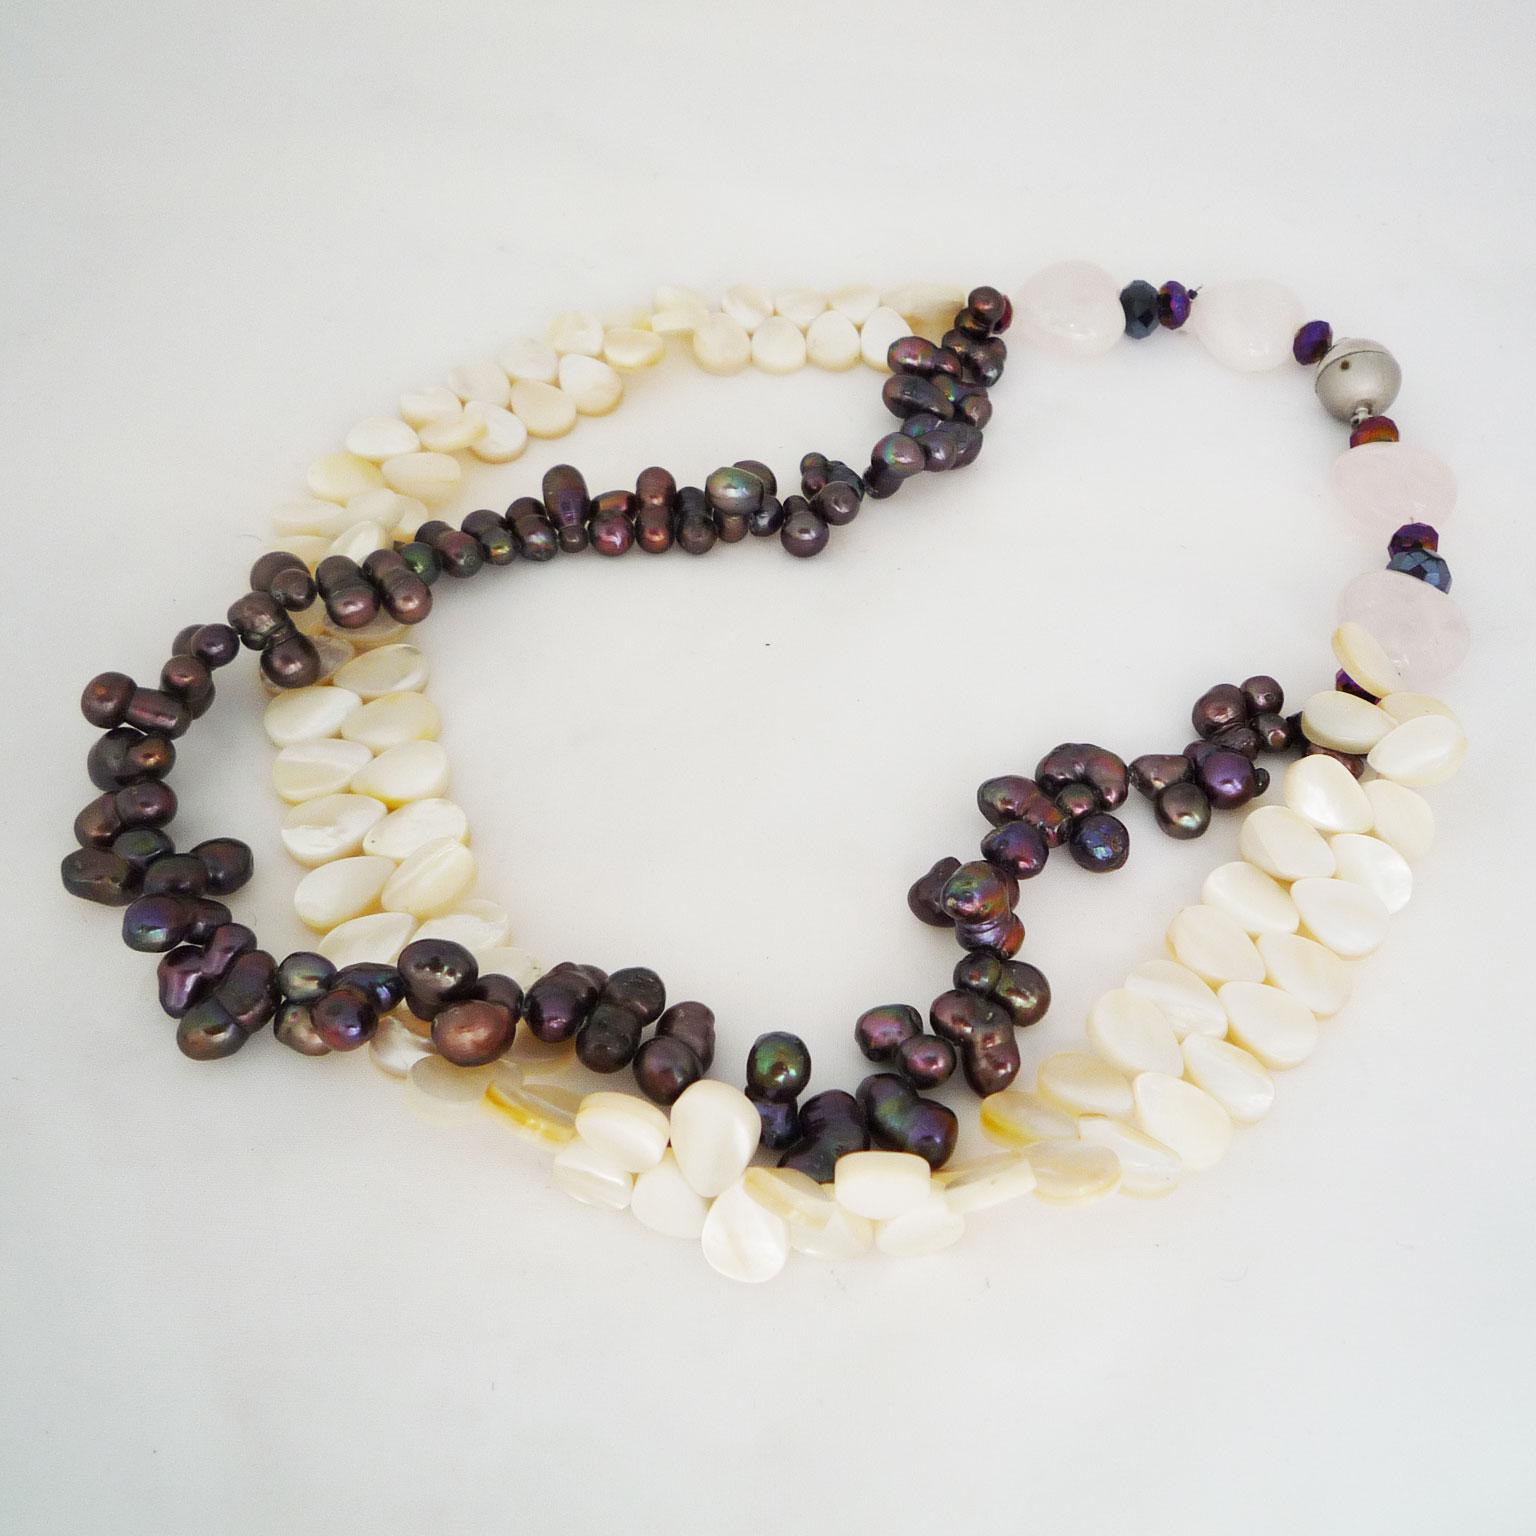 Necklace made of dark pearls and mother-of-pearl plates (Moderne)